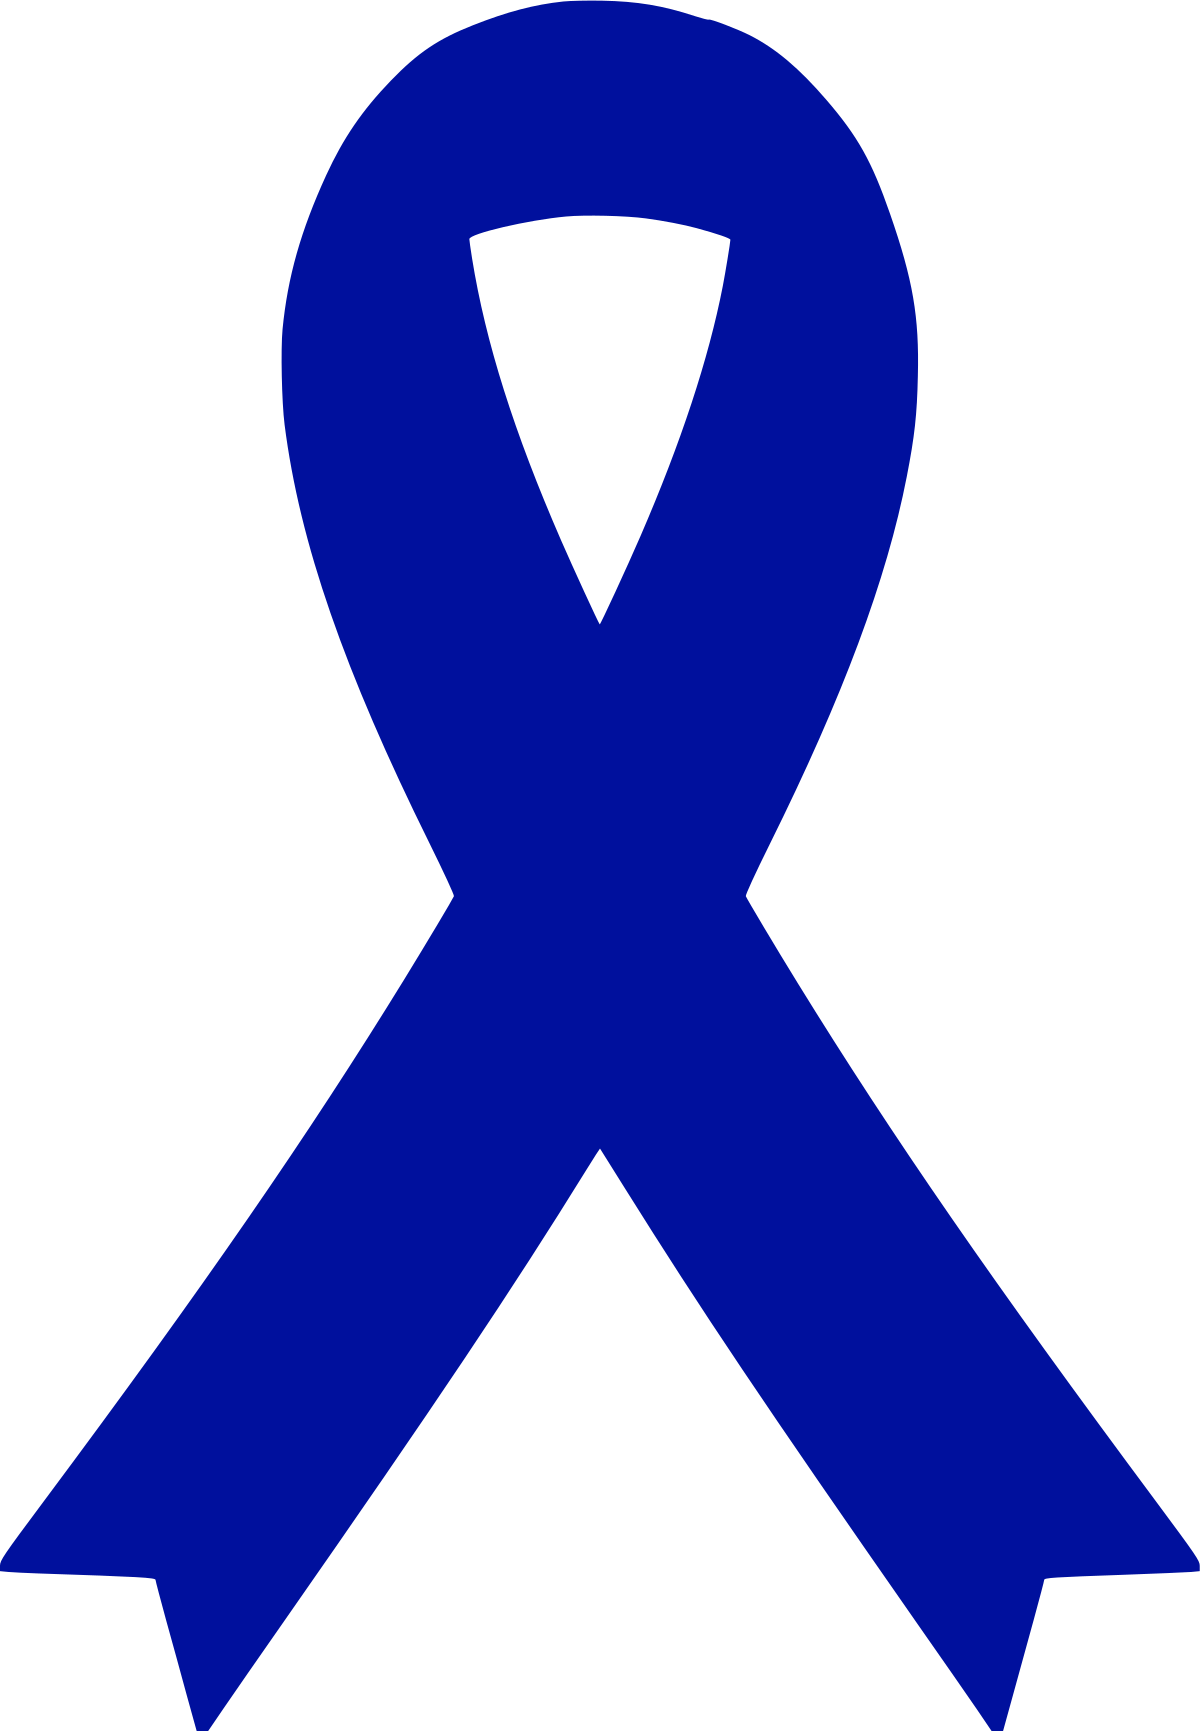 Download File:Blue awareness ribbon icon 2.svg - Wikimedia Commons